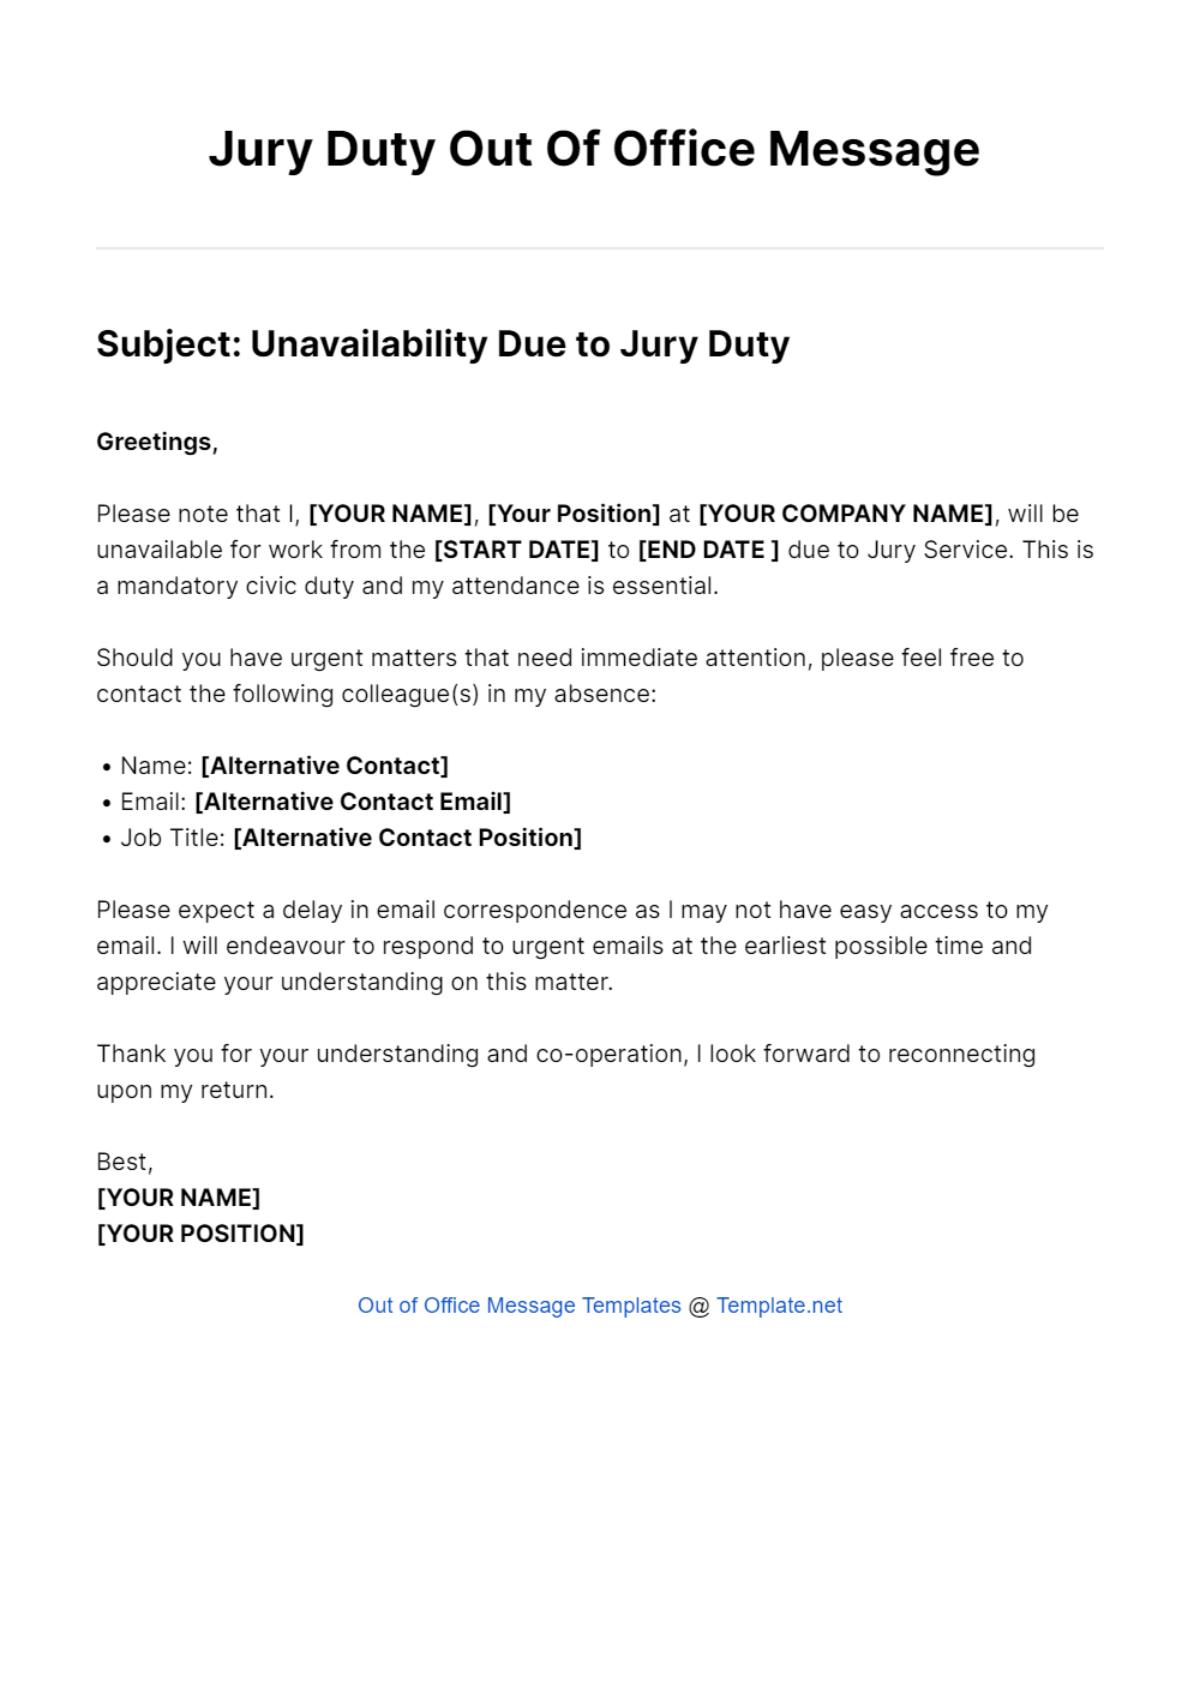 Jury Duty Out Of Office Message Template